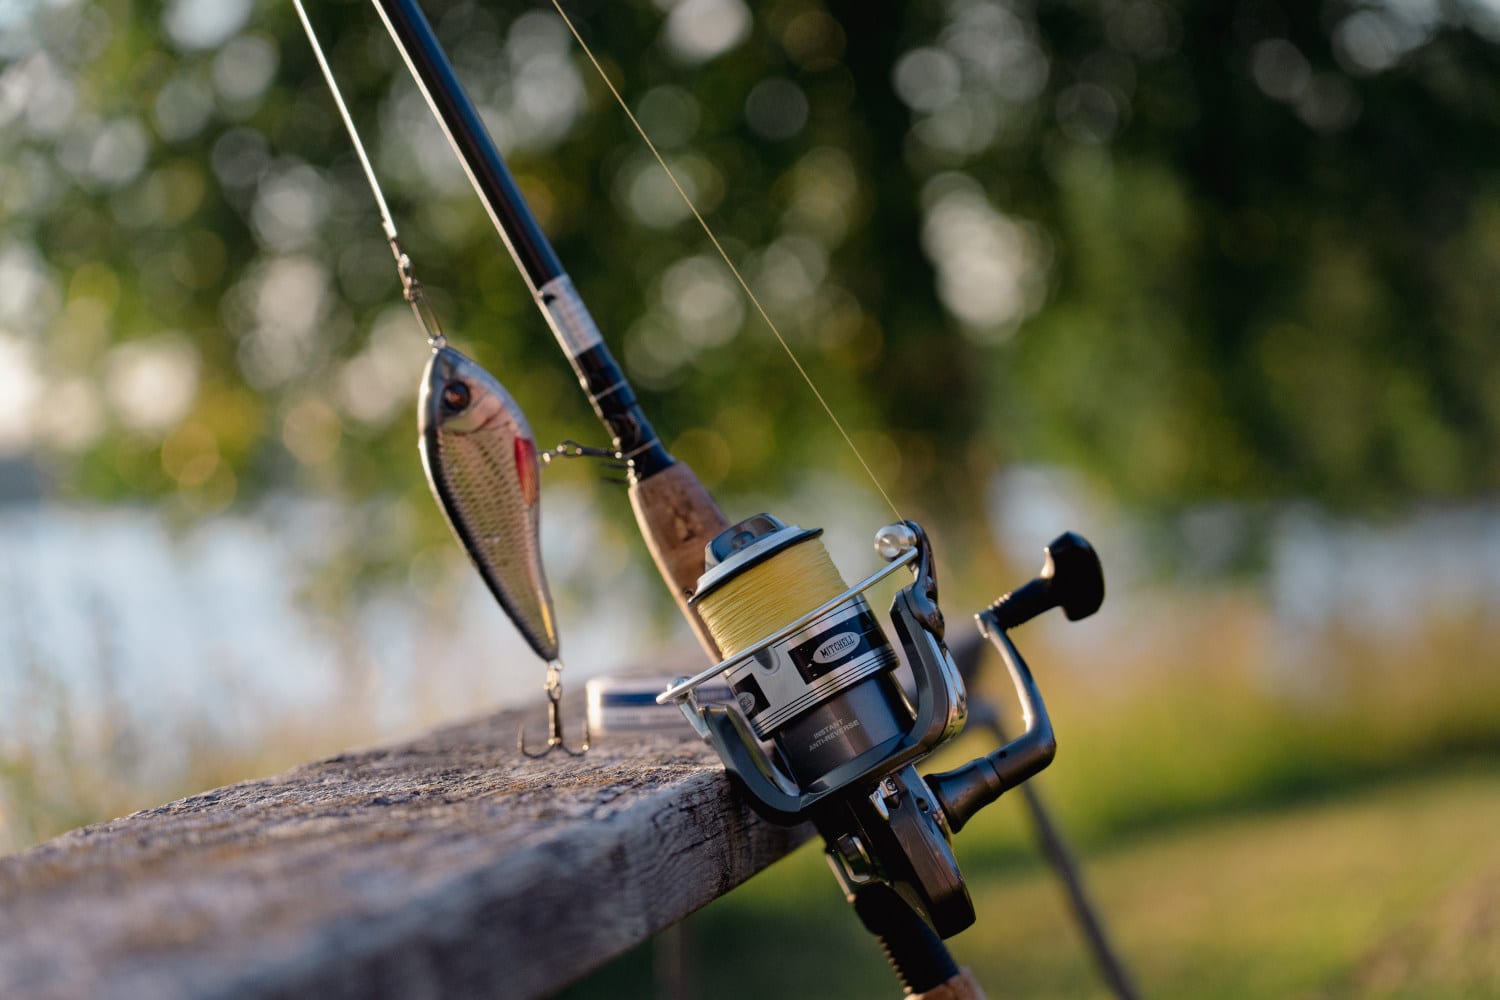 How To Choose The Perfect Fishing Reel Based On Needs & Budget 